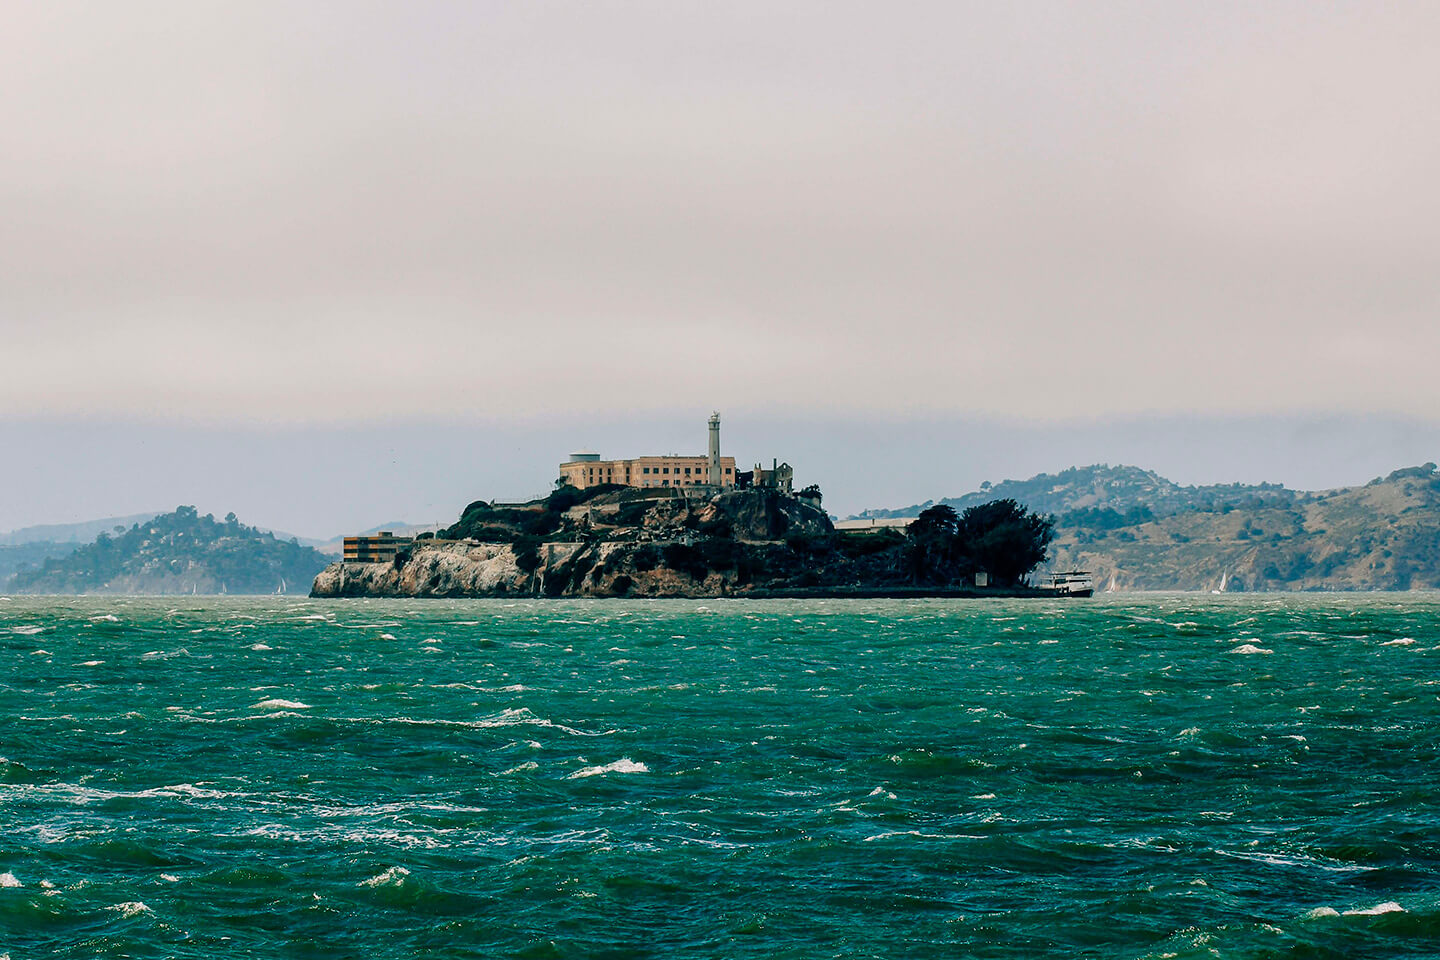 View of Alcatraz Island on the water